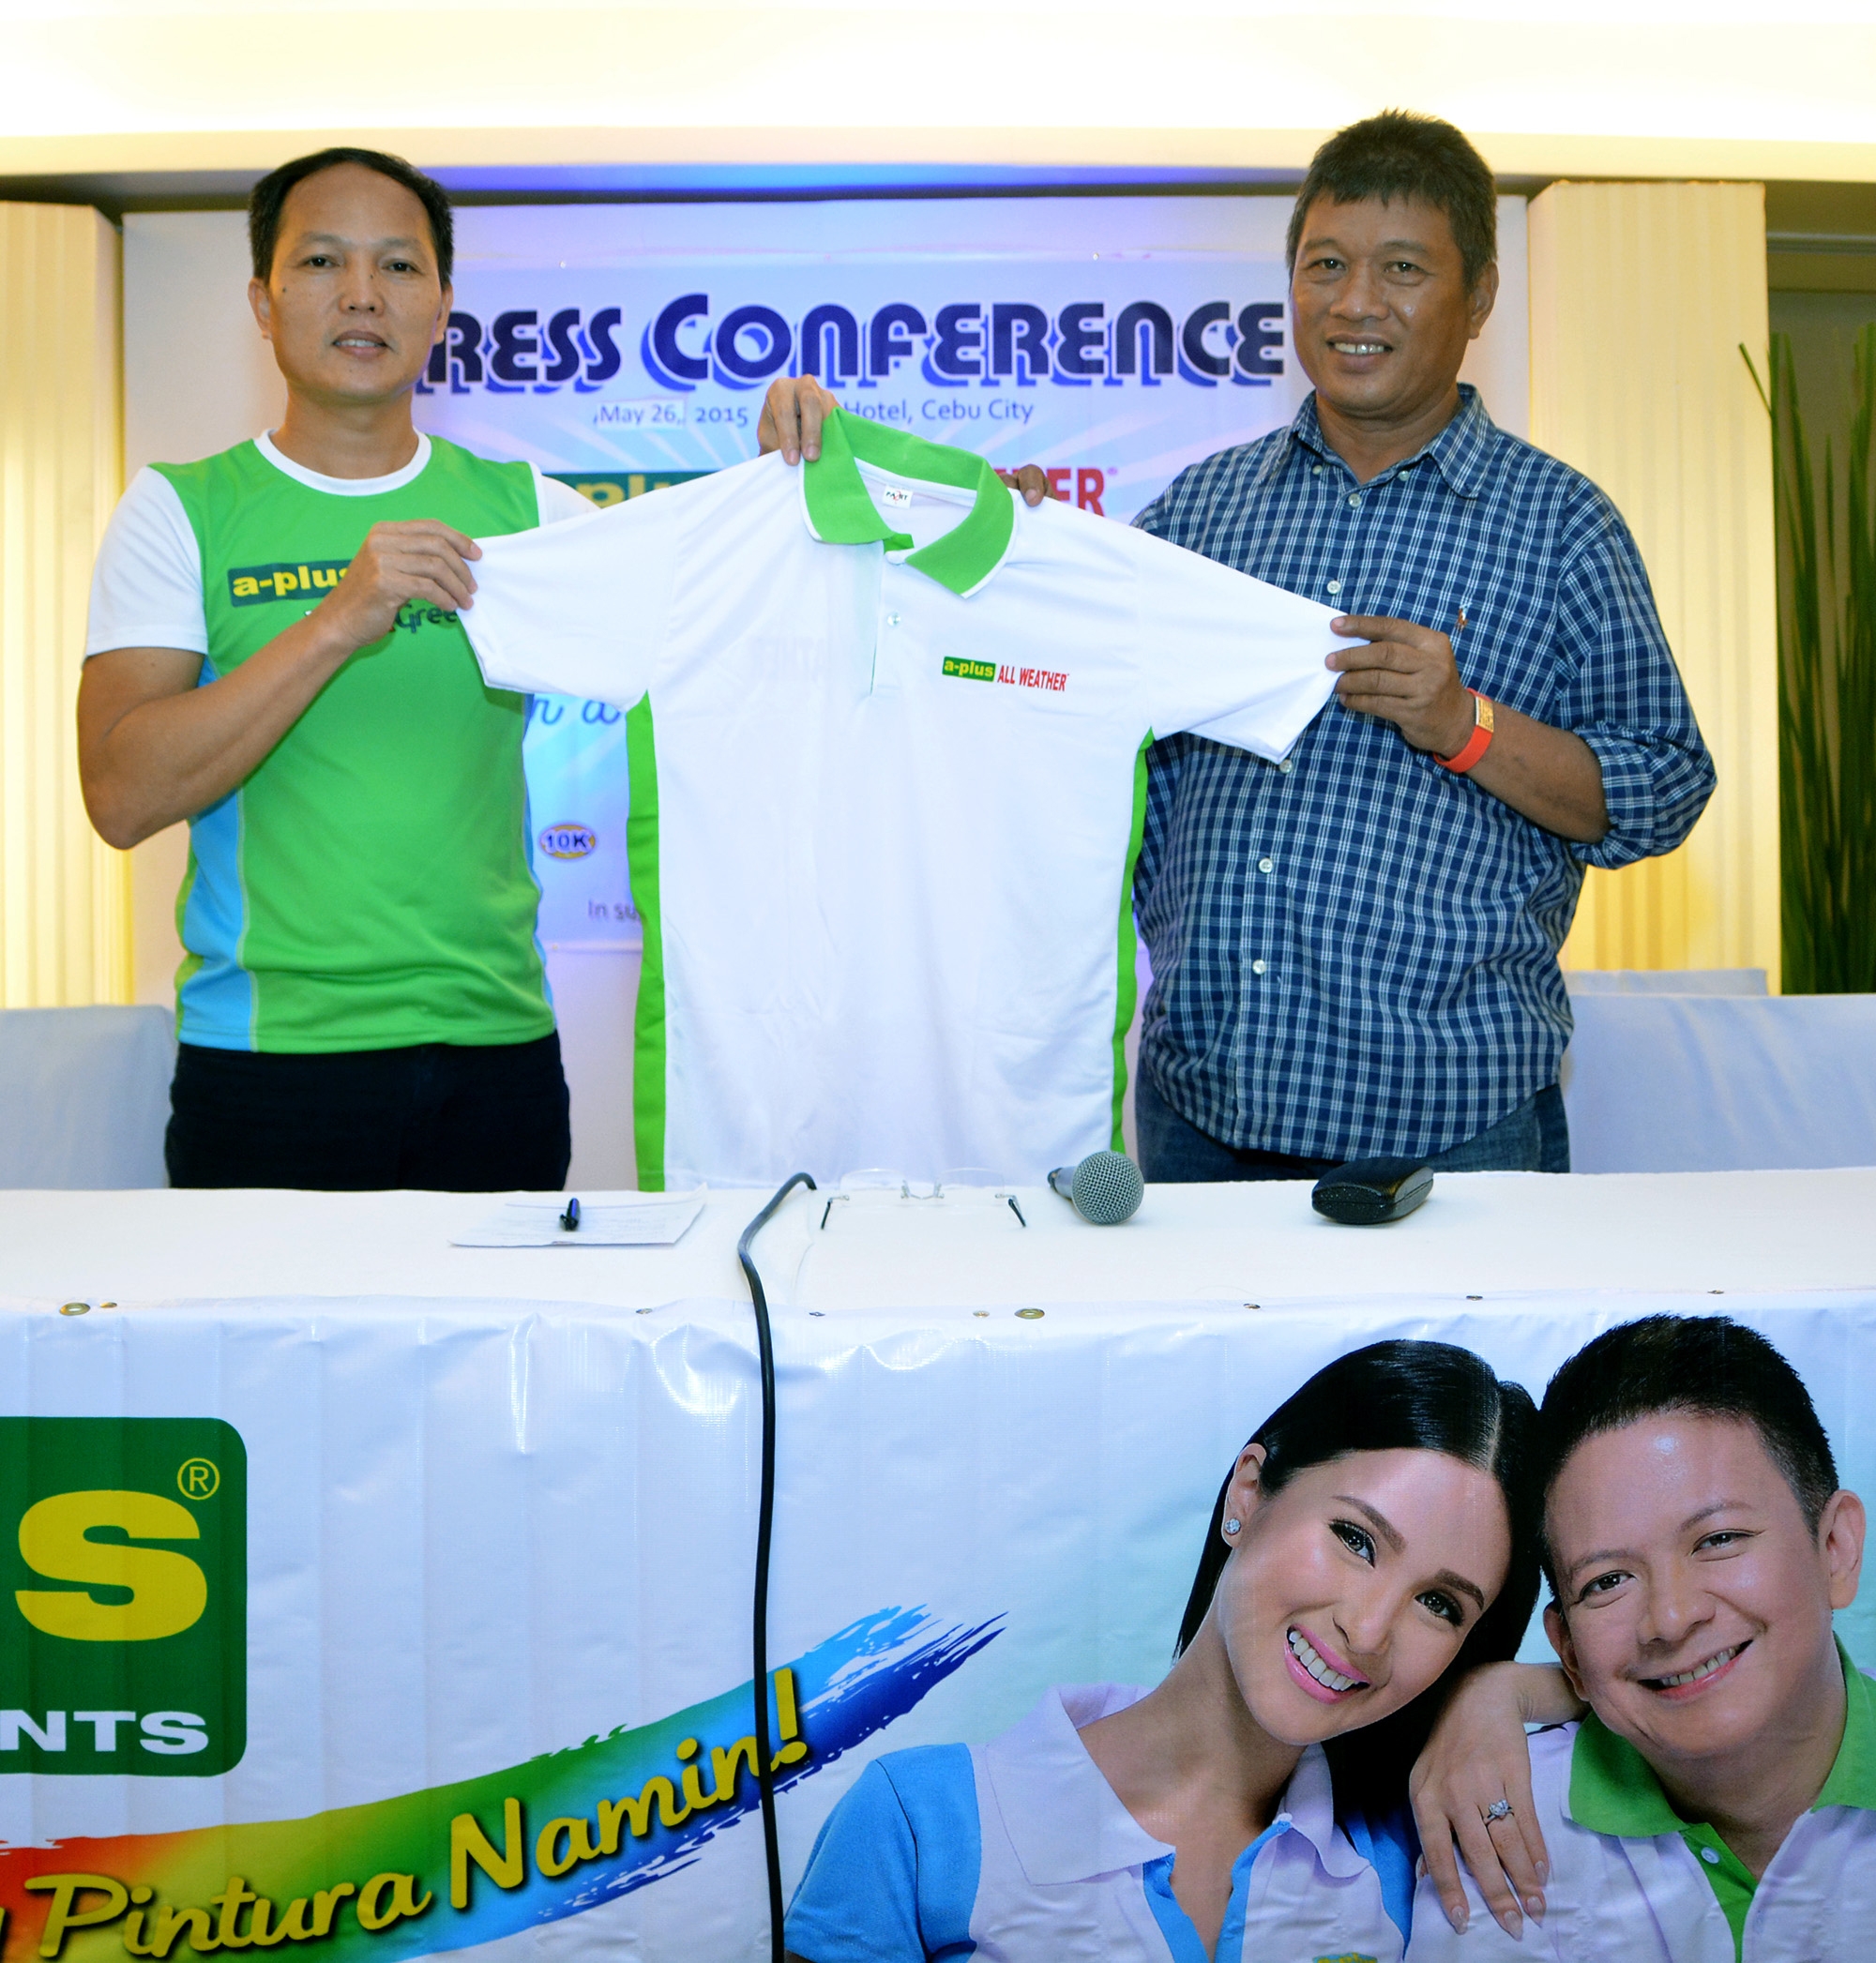 A-Plus Visayas-Mindanao operation head Pepito Lim and race director Joel baring show the race sigle in a press conference at the Quest Hotel Cebu